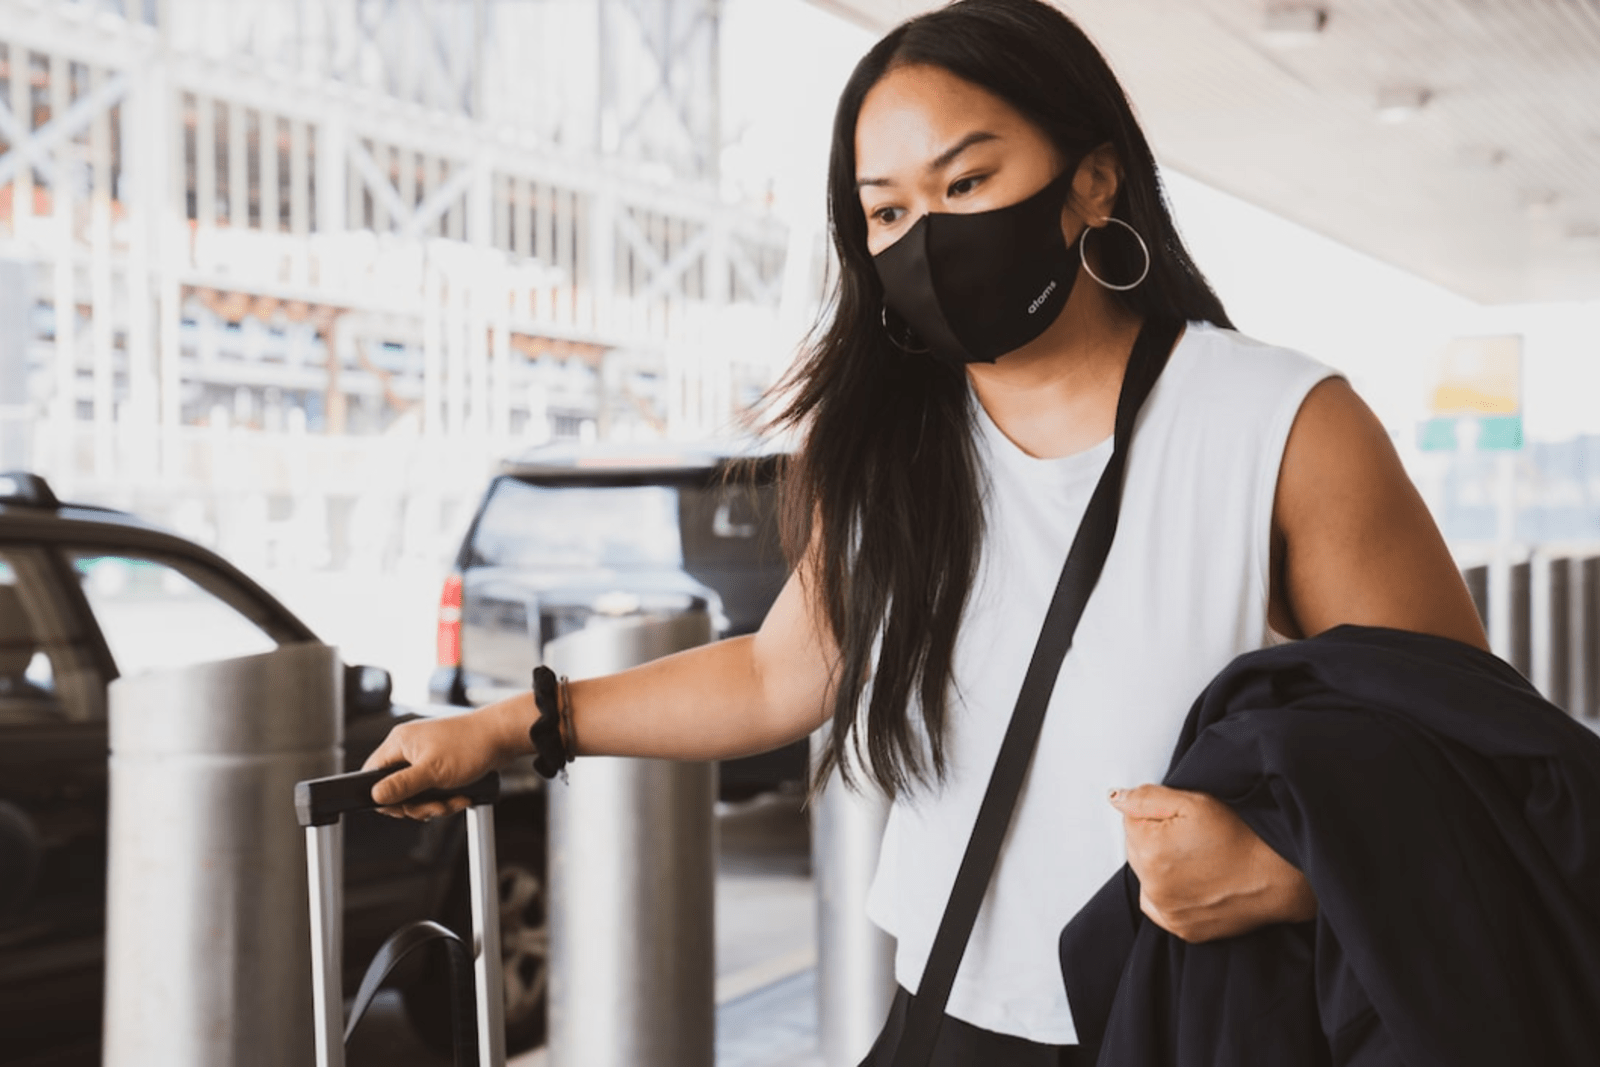 A woman wearing a mask outside an airport